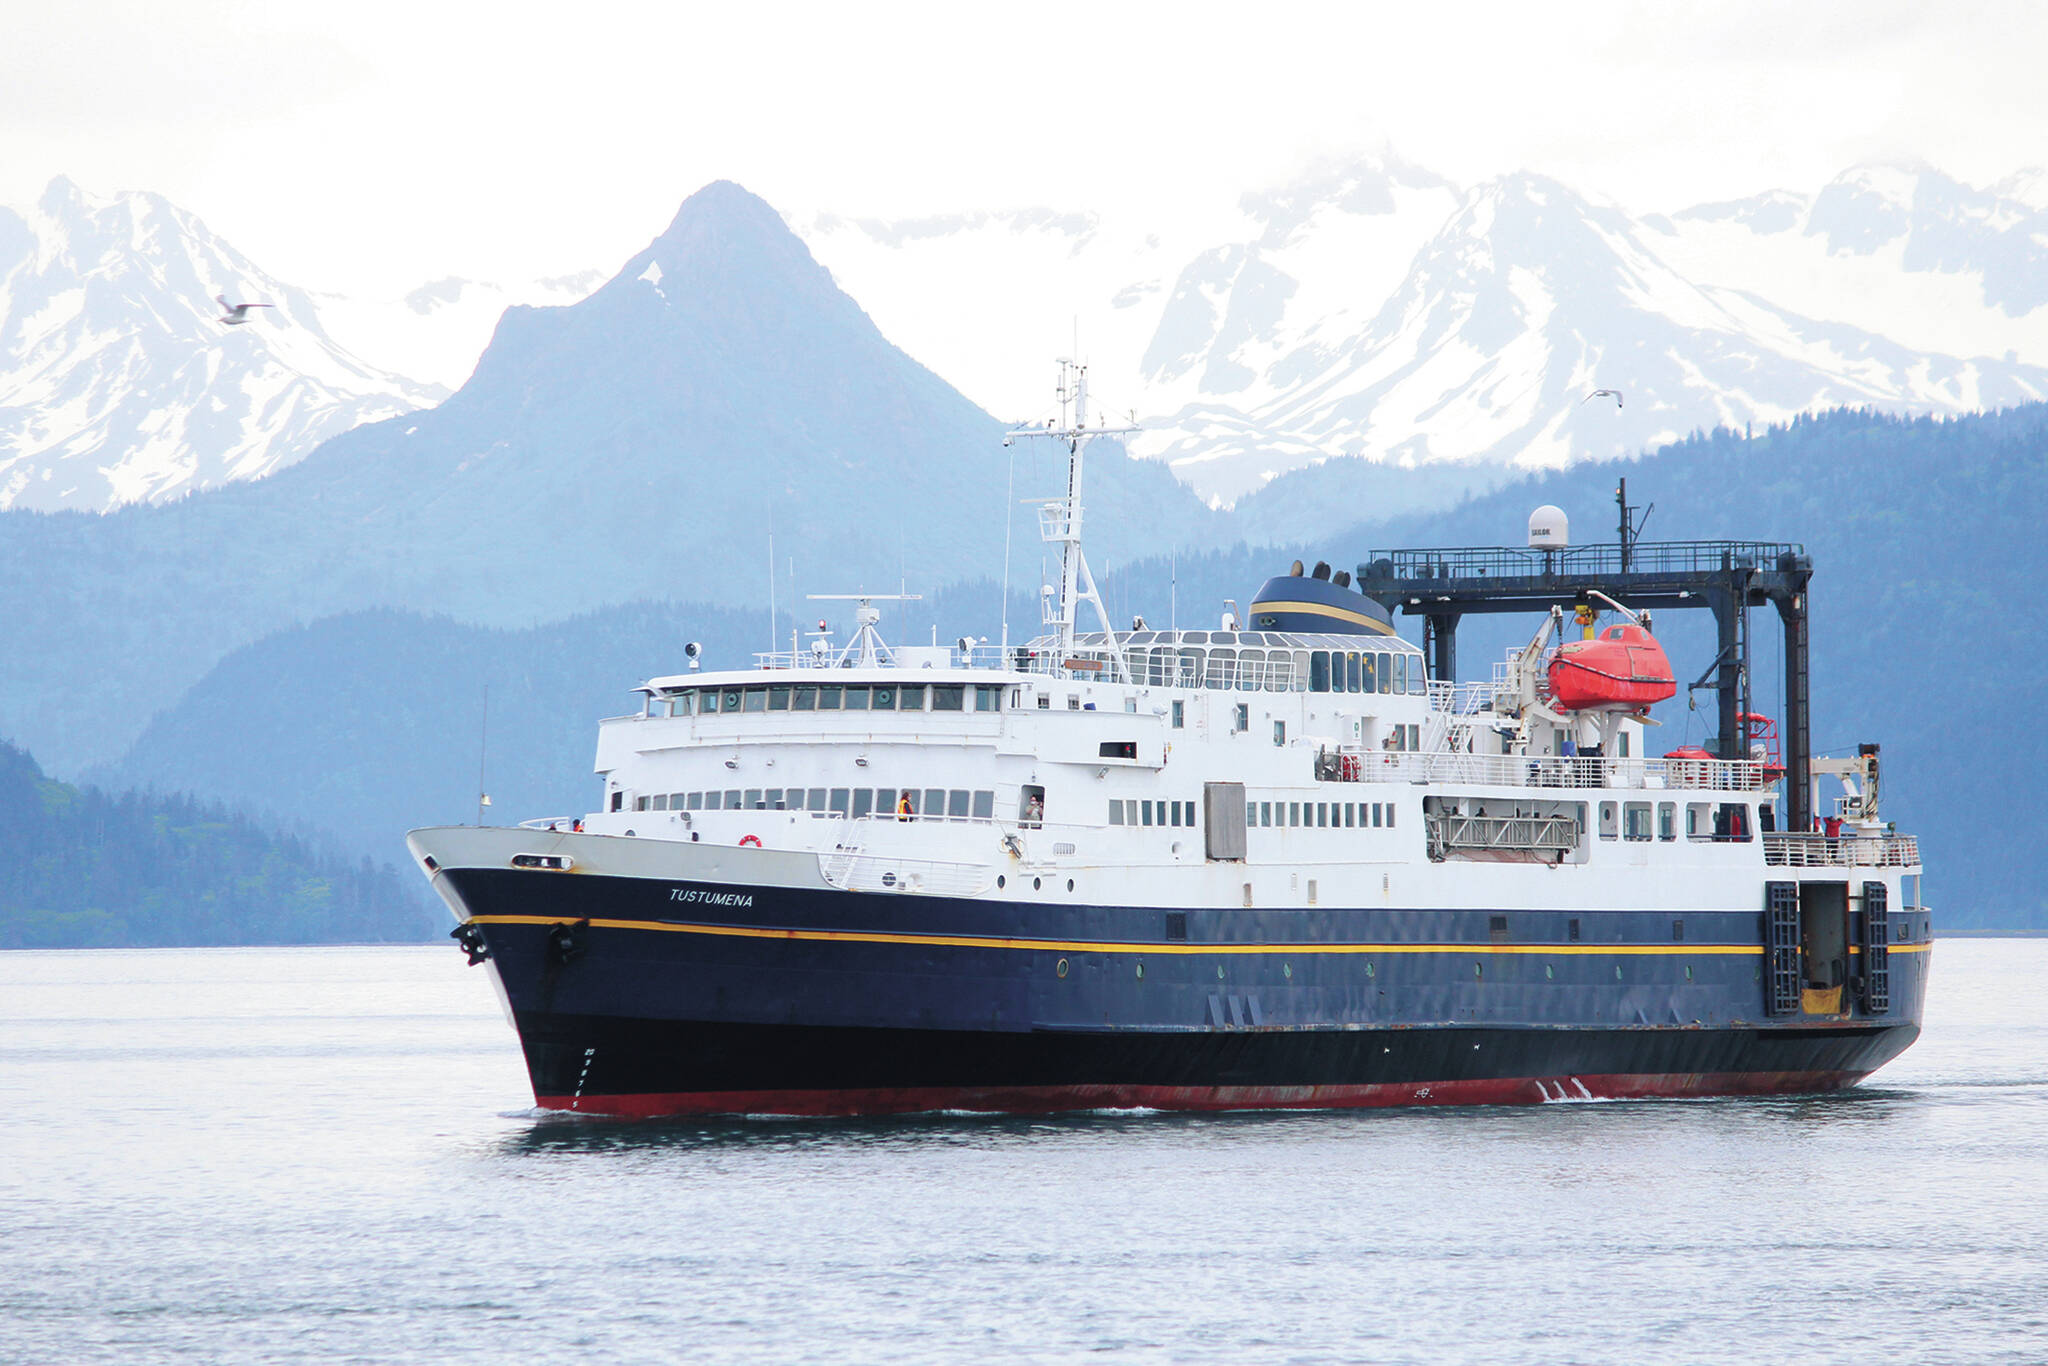 The state ferry M/V Tustumena pulls into the Homer Harbor on Monday, June 8, 2020 in Homer, Alaska. (Photo by Megan Pacer/Homer News)
The state ferry M/V Tustumena pulls into the Homer Harbor on Monday, June 8, 2020 in Homer, Alaska. (Photo by Megan Pacer/Homer News)